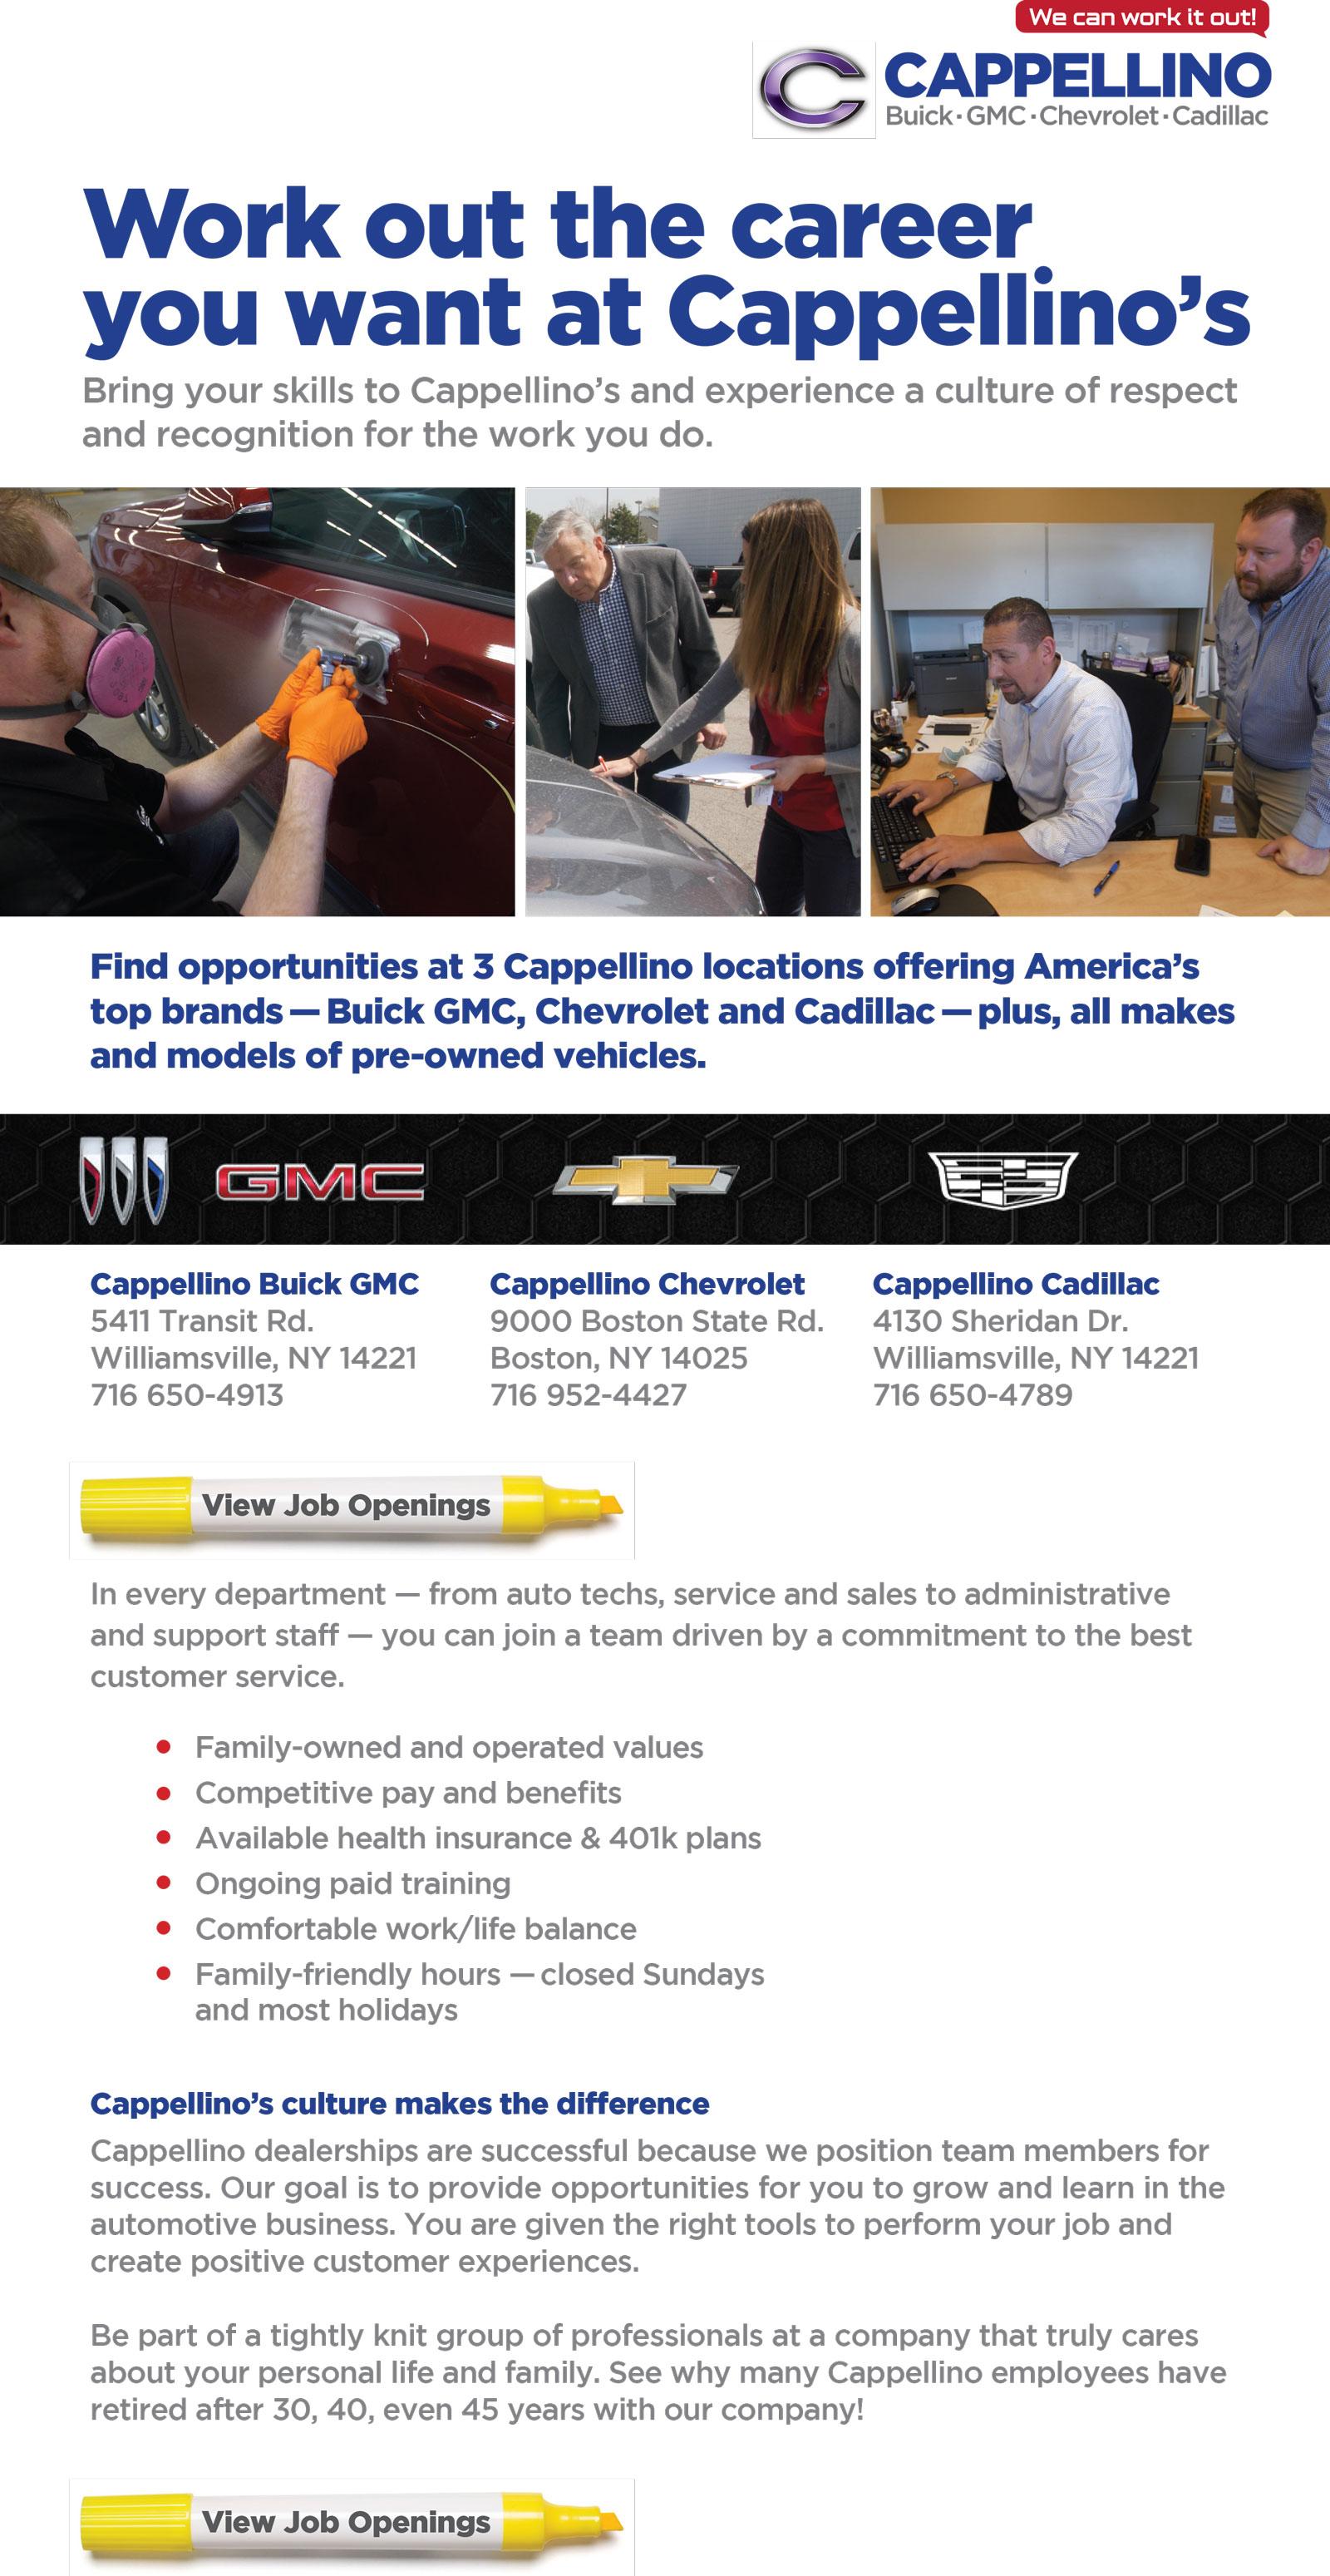 Careers at Cappellino Buick GMC